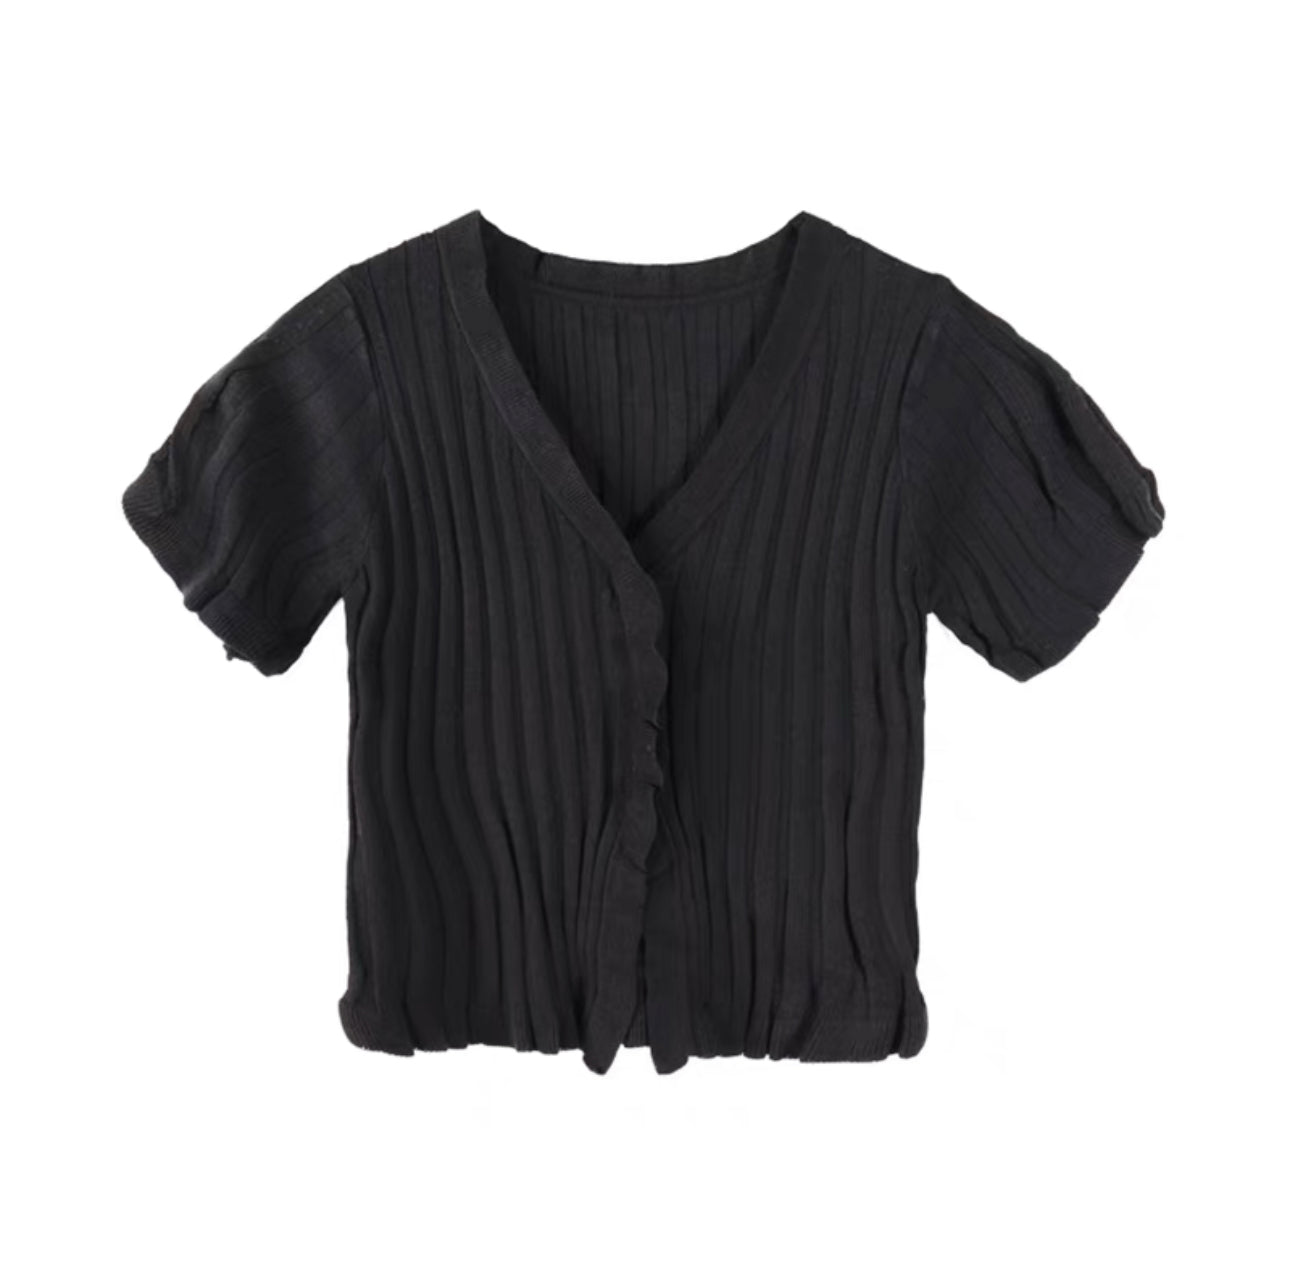 Waved Button-up Knit Top - Black